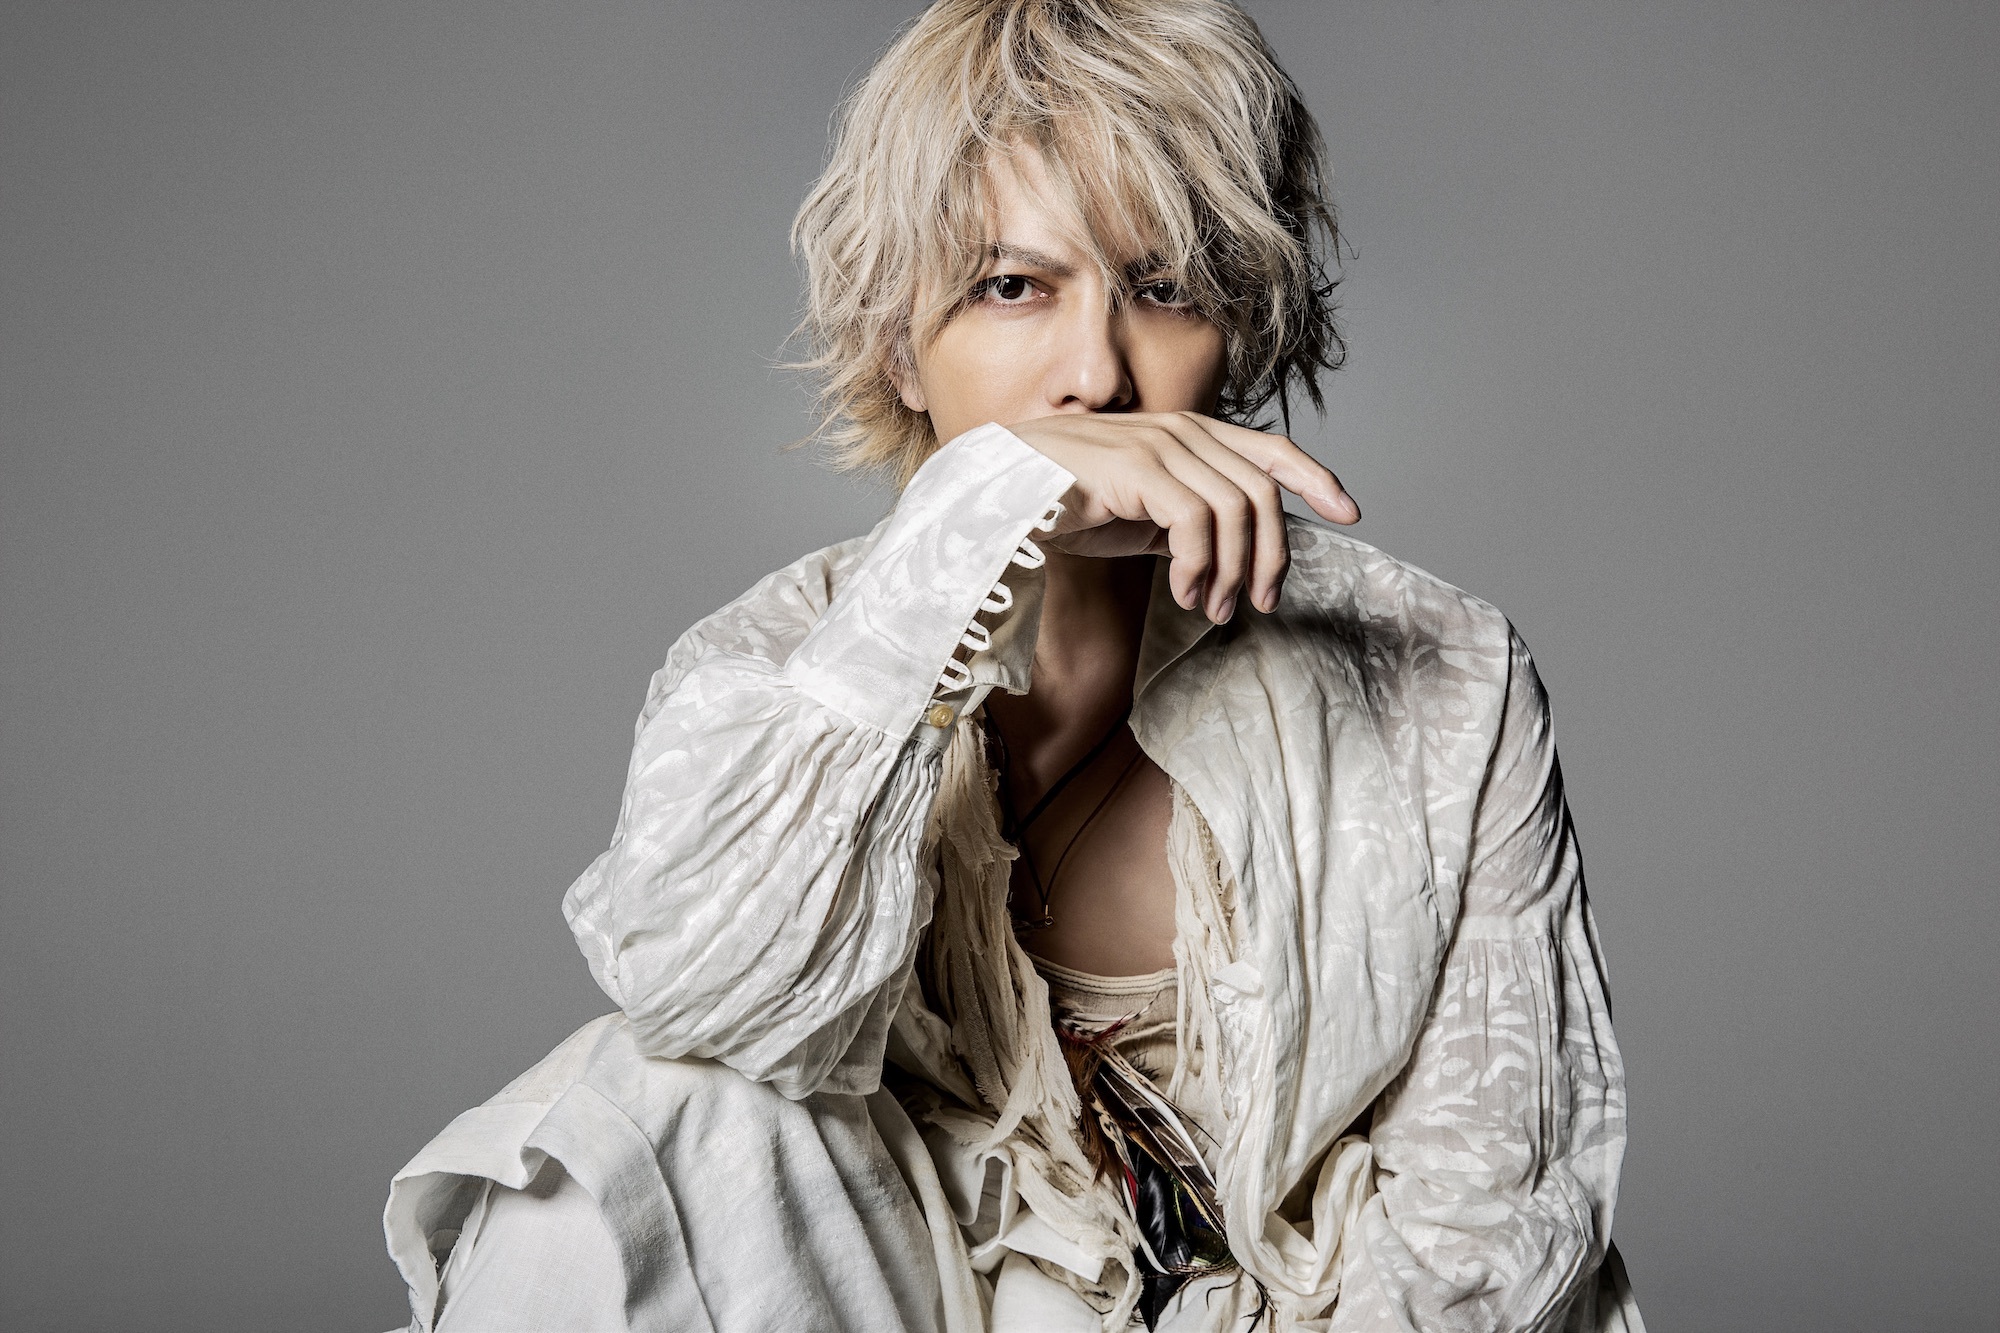 Hyde Official